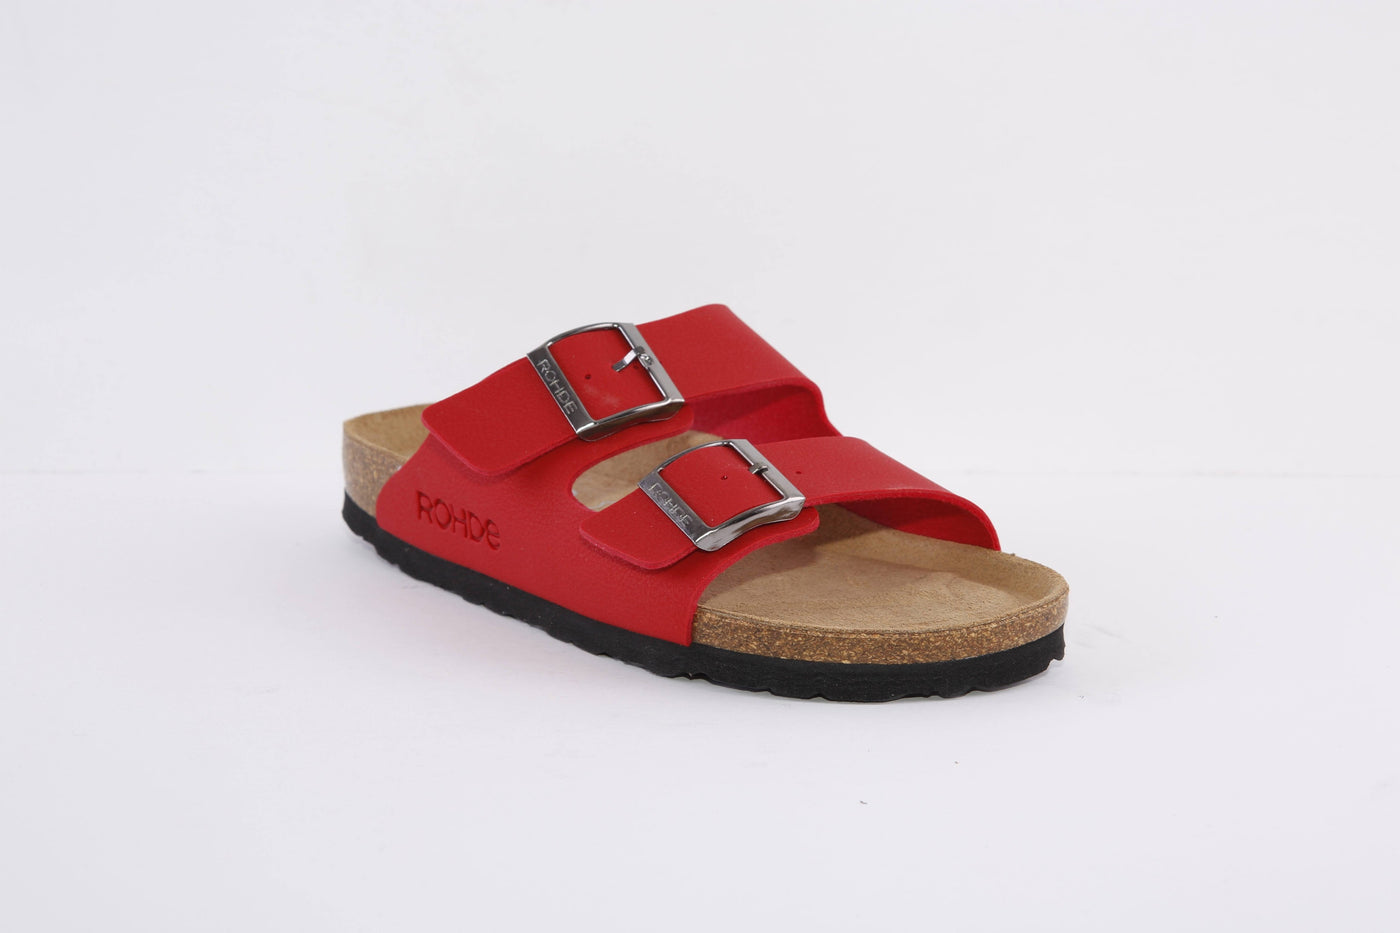 ROHDE - 5631 41 FLAT 2 BUCKLE COMFORT MULE - RED